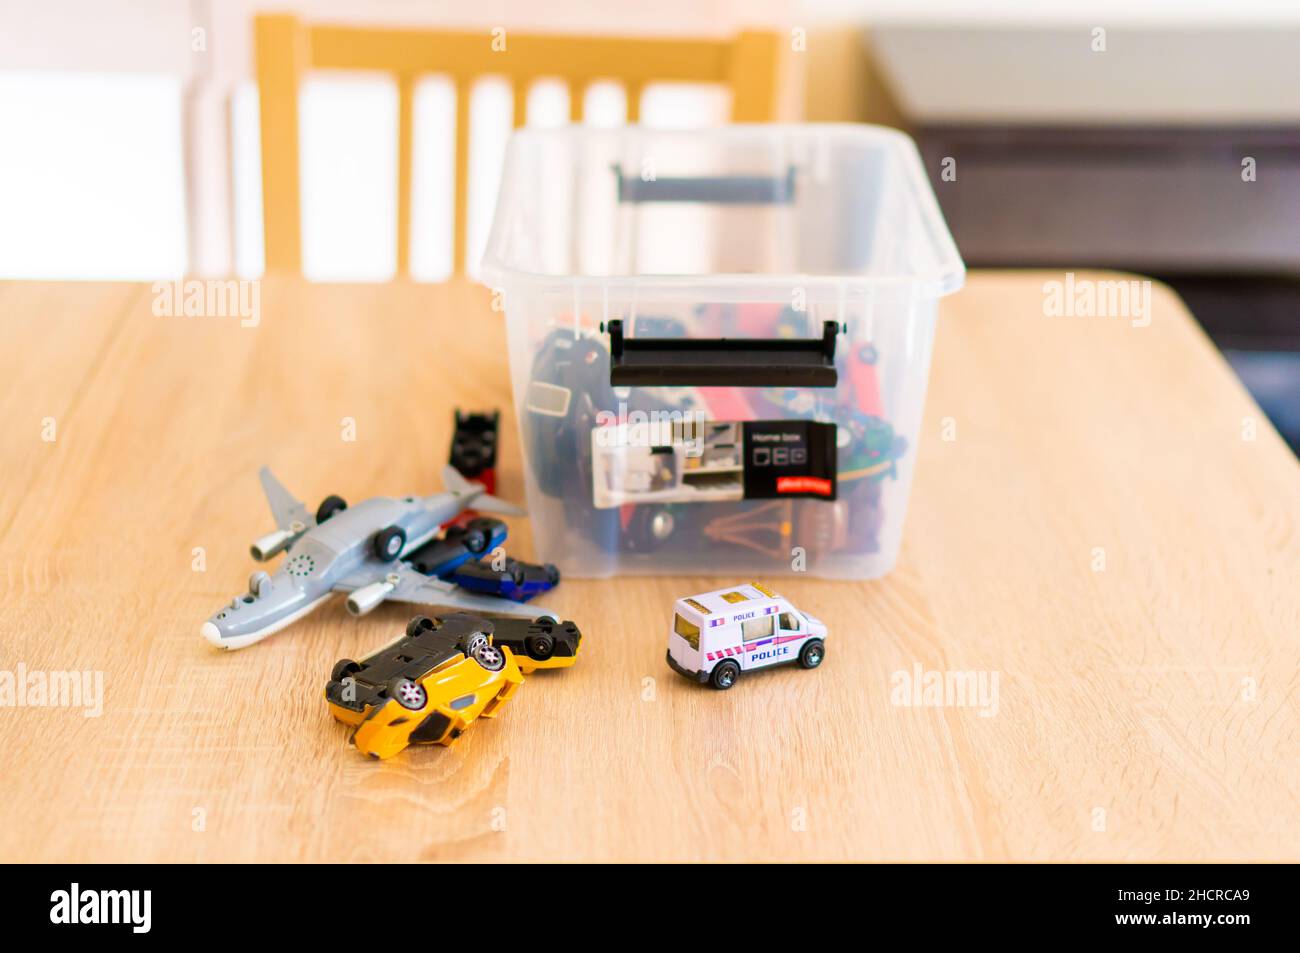 A plastic box with toy model cars and planes on a wooden table Stock Photo